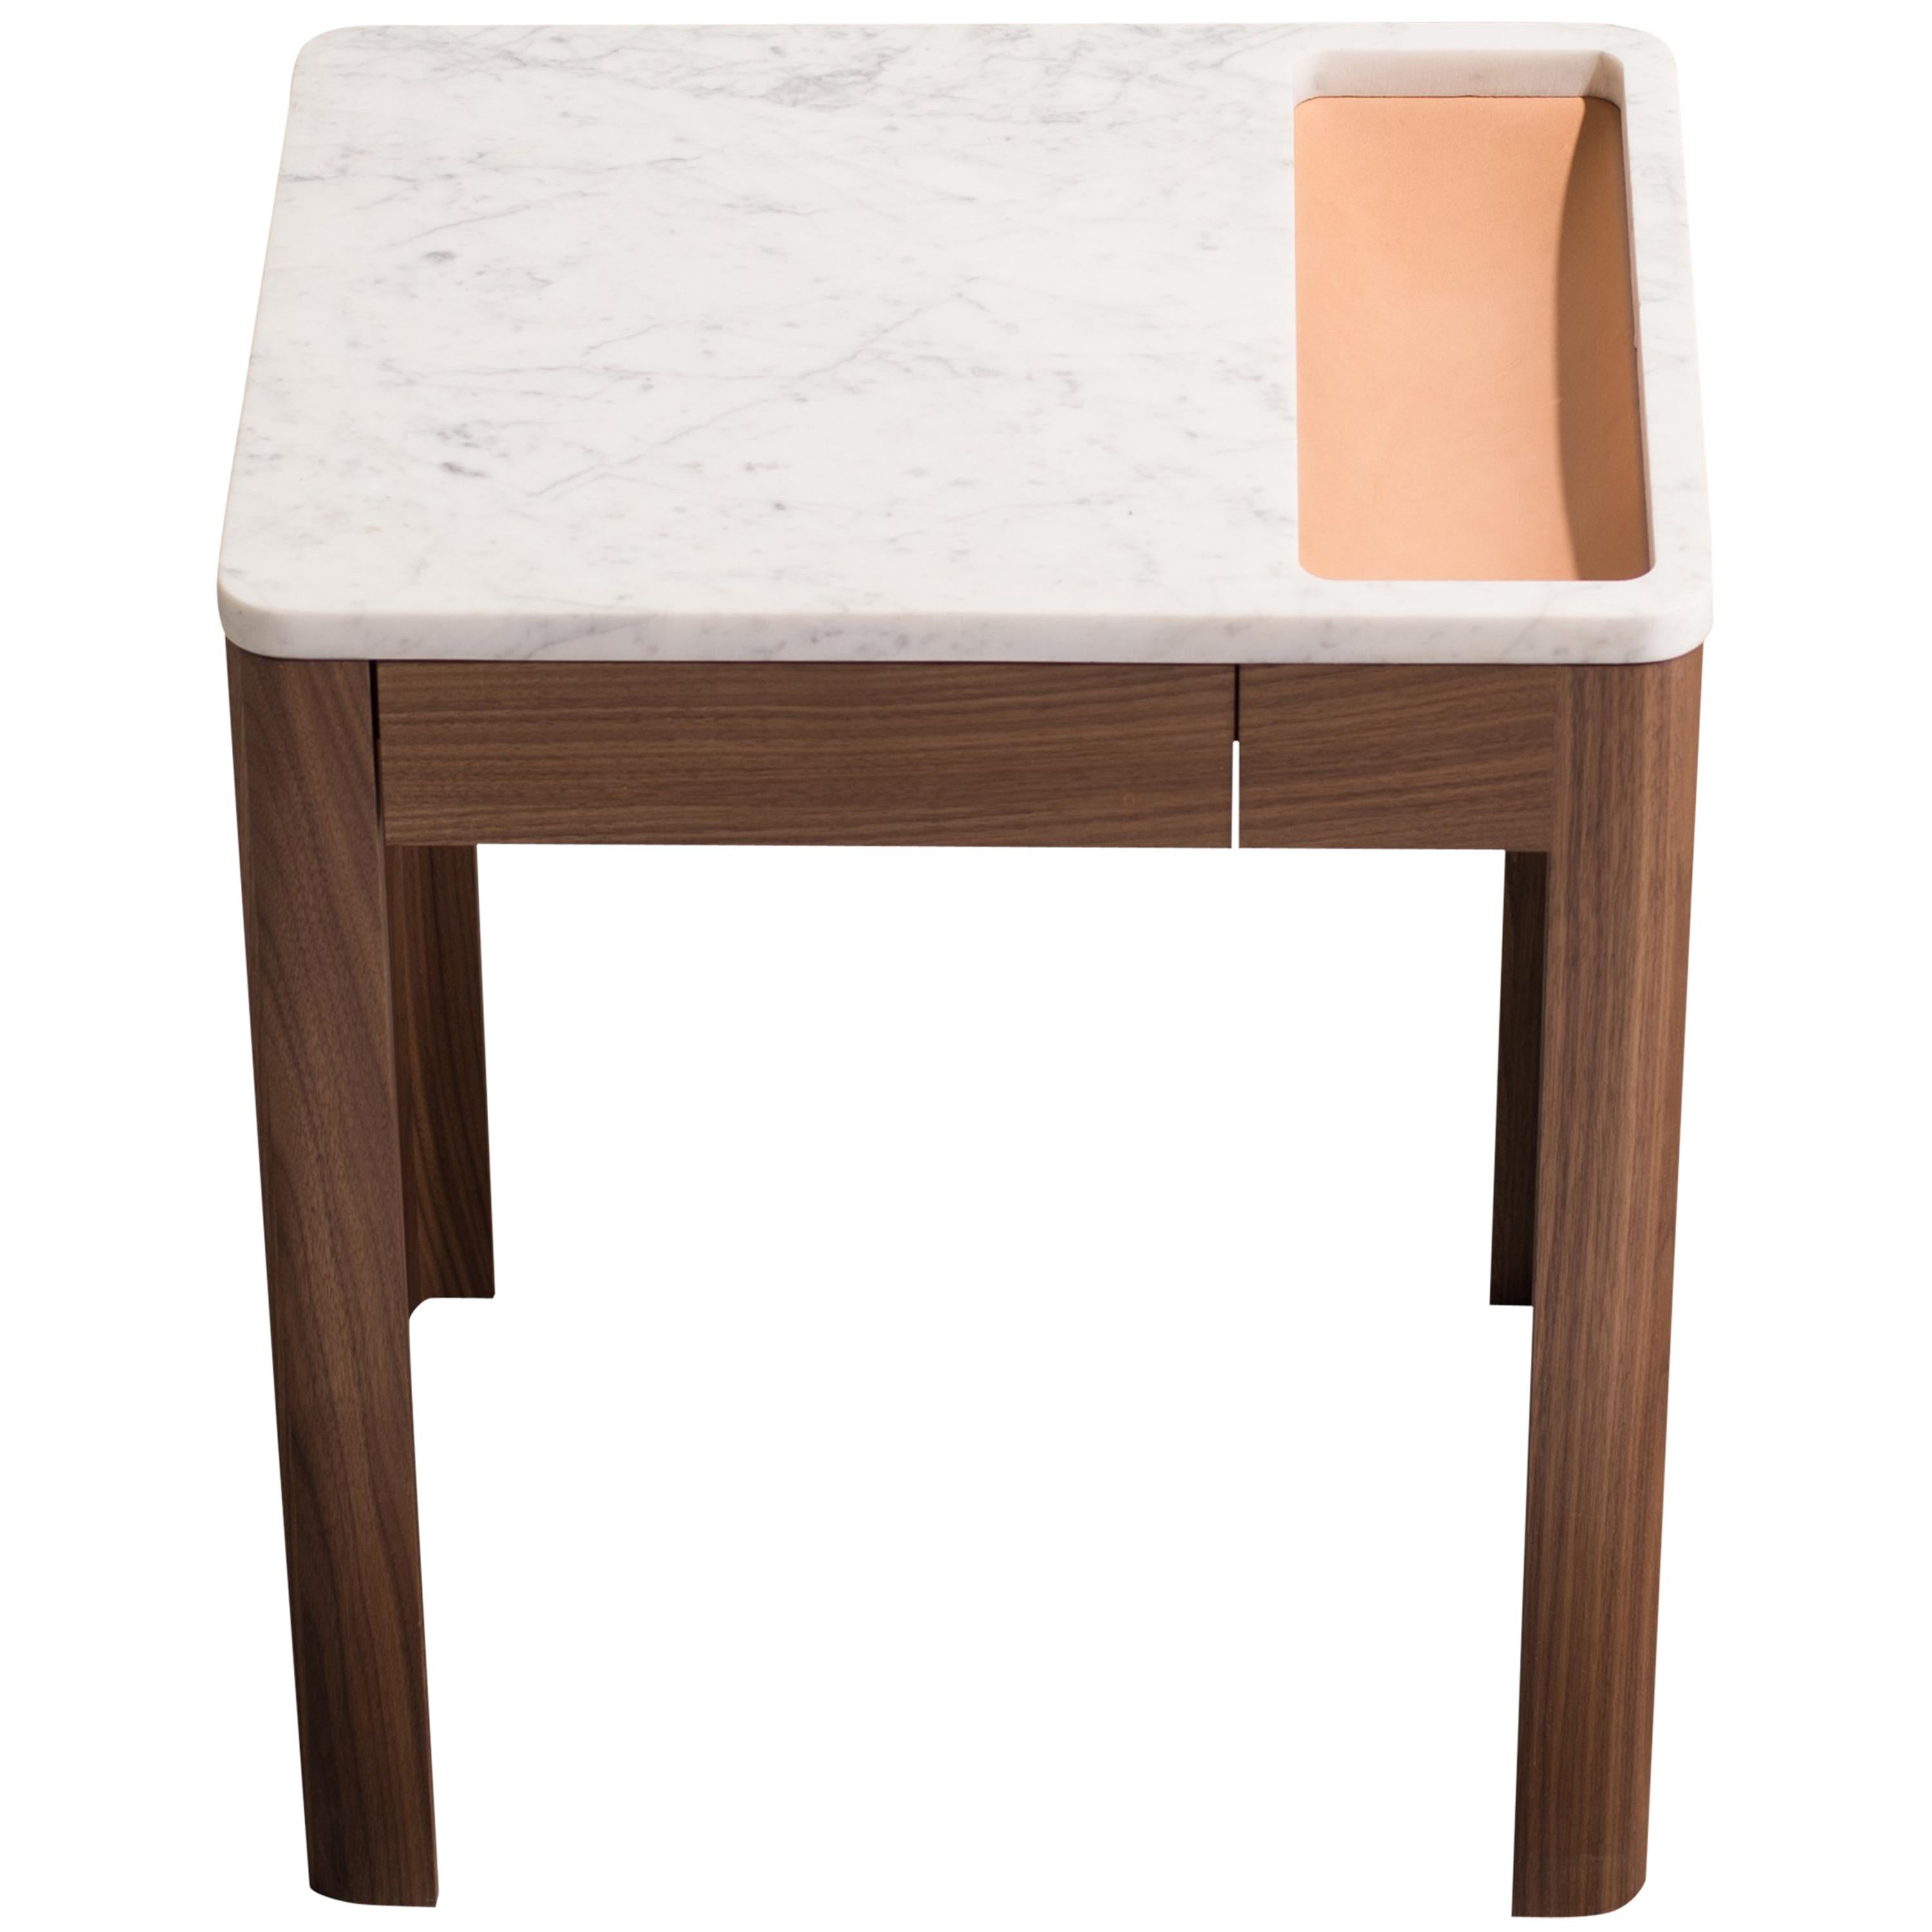 Contemporary Void Side Table in White Oak, Carrara Marble, and Leather by Harold im Angebot